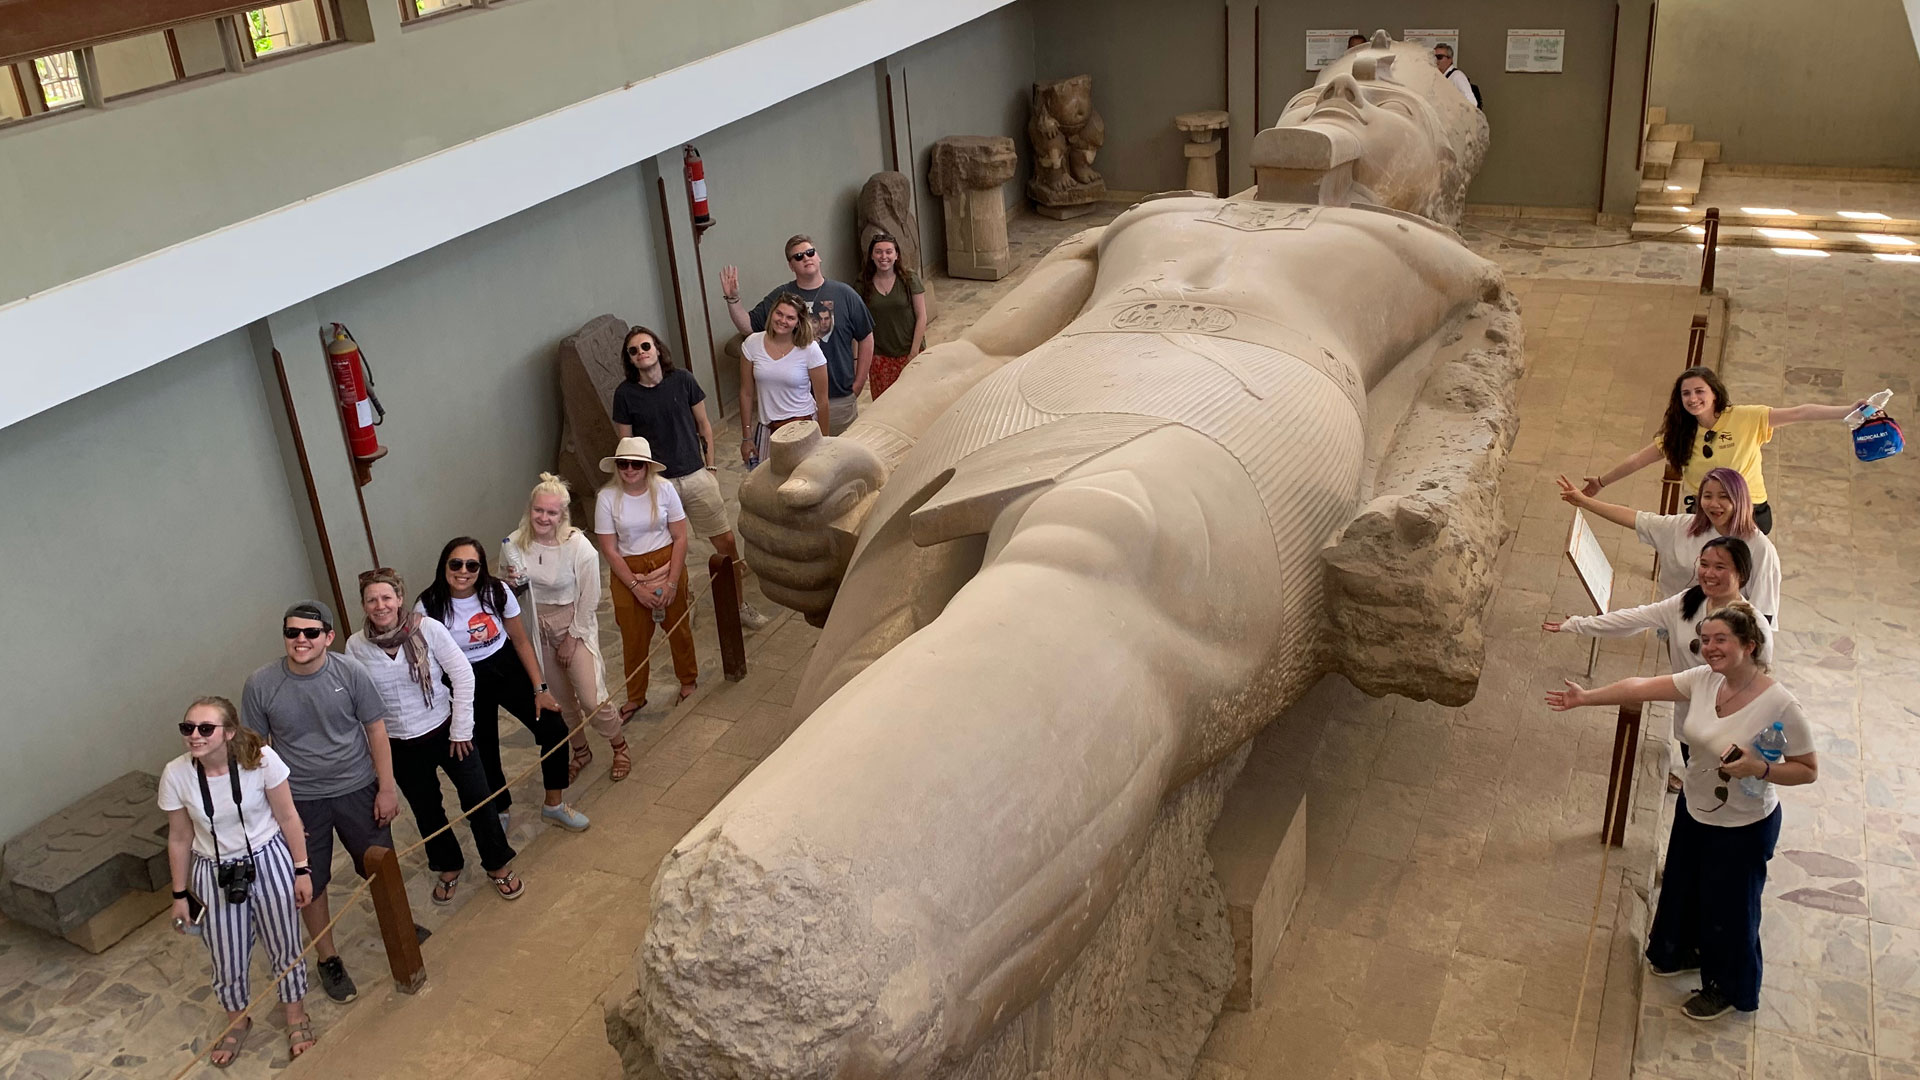 JWU Hospitality students touring a mummy exhibit in Egypt